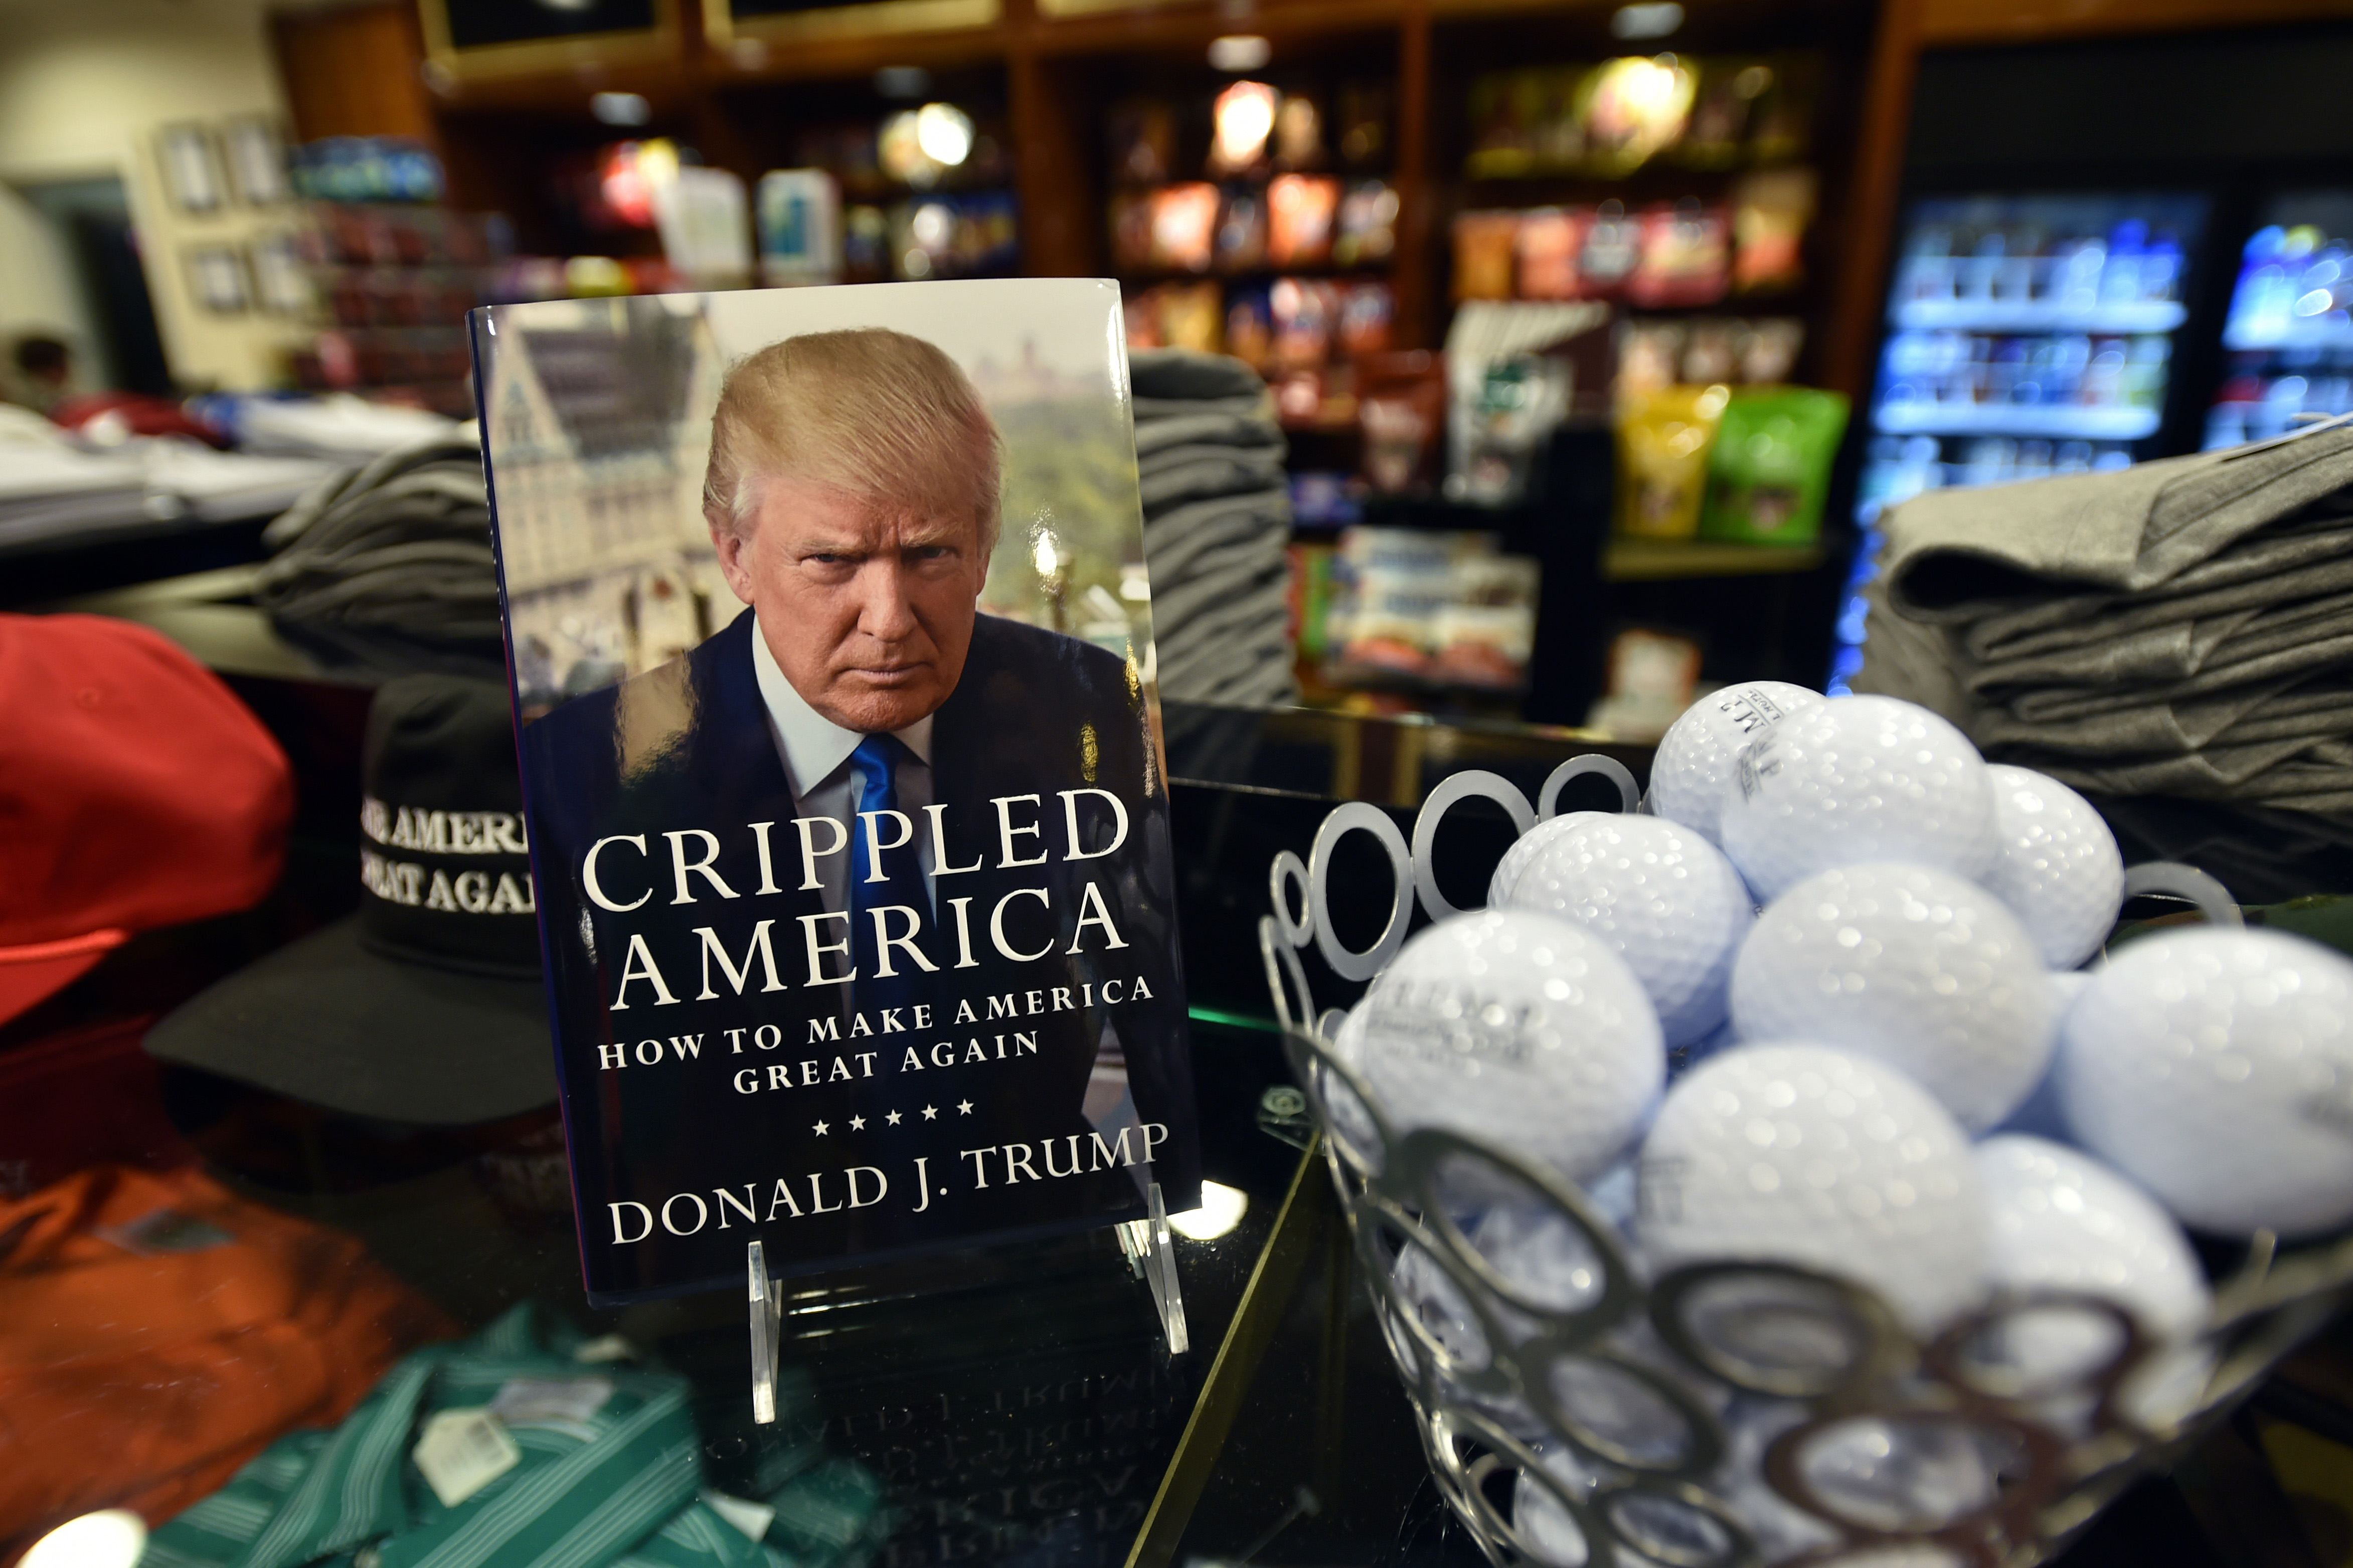 Donald Trump's book is seen for sale at a shop inside the Trump International Hotel in Las Vegas, Nevada.  (JOSH EDELSON/AFP/Getty Images)